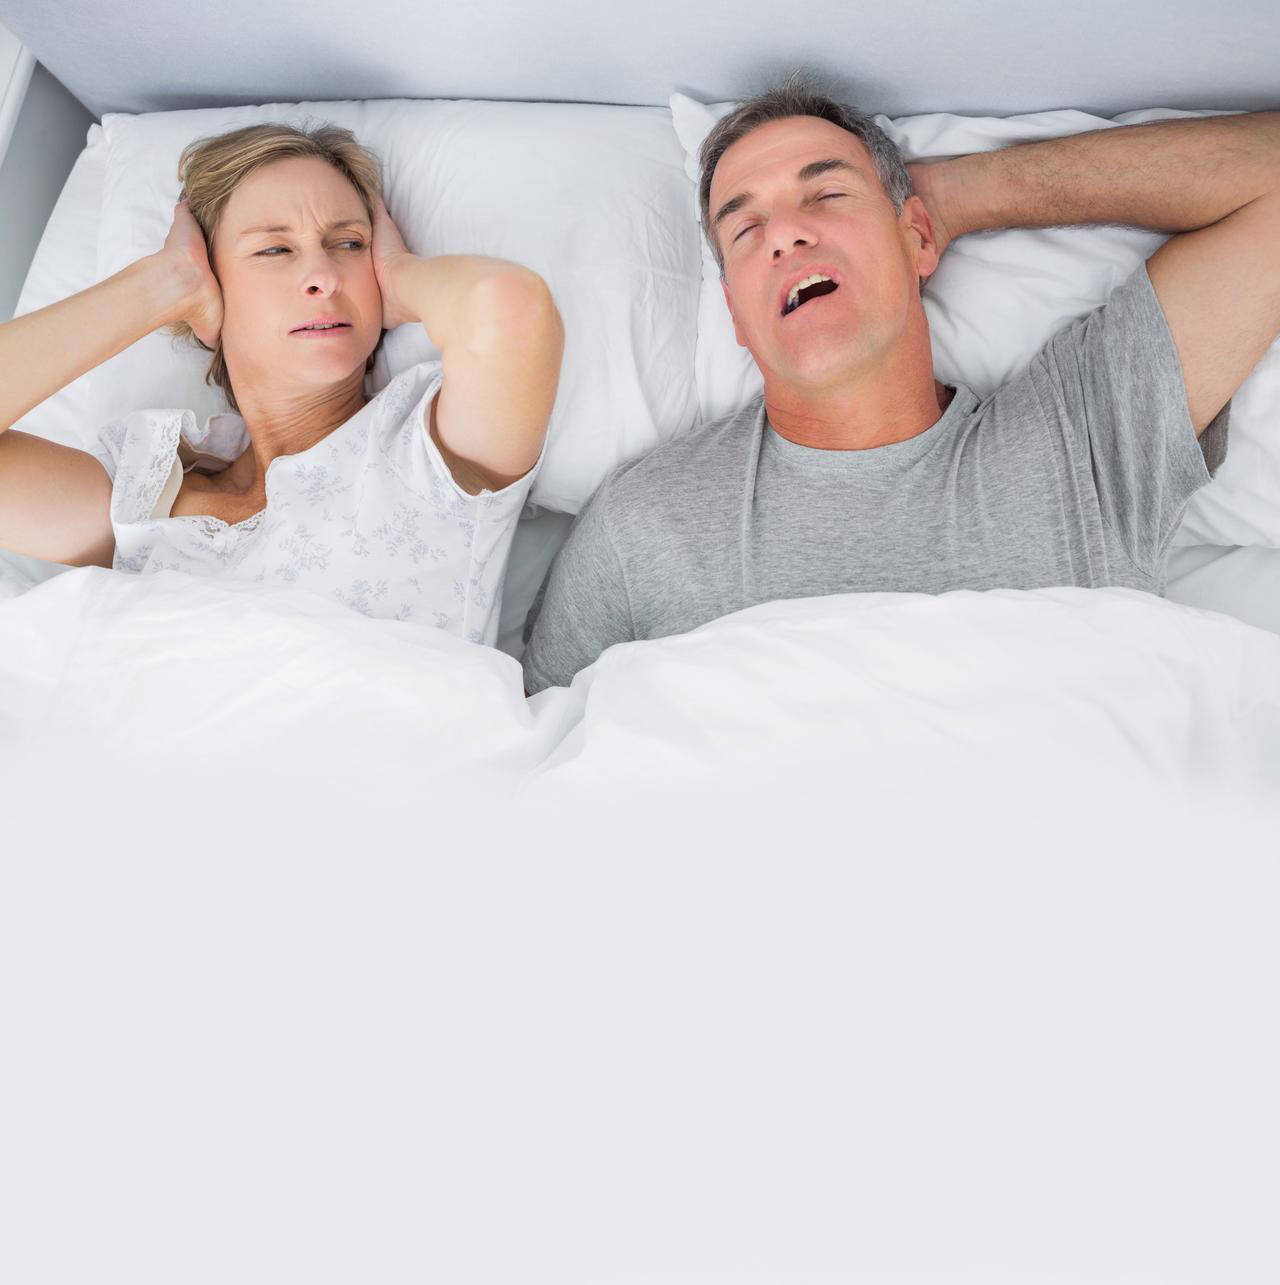 Wife unhappy with husband's snoring